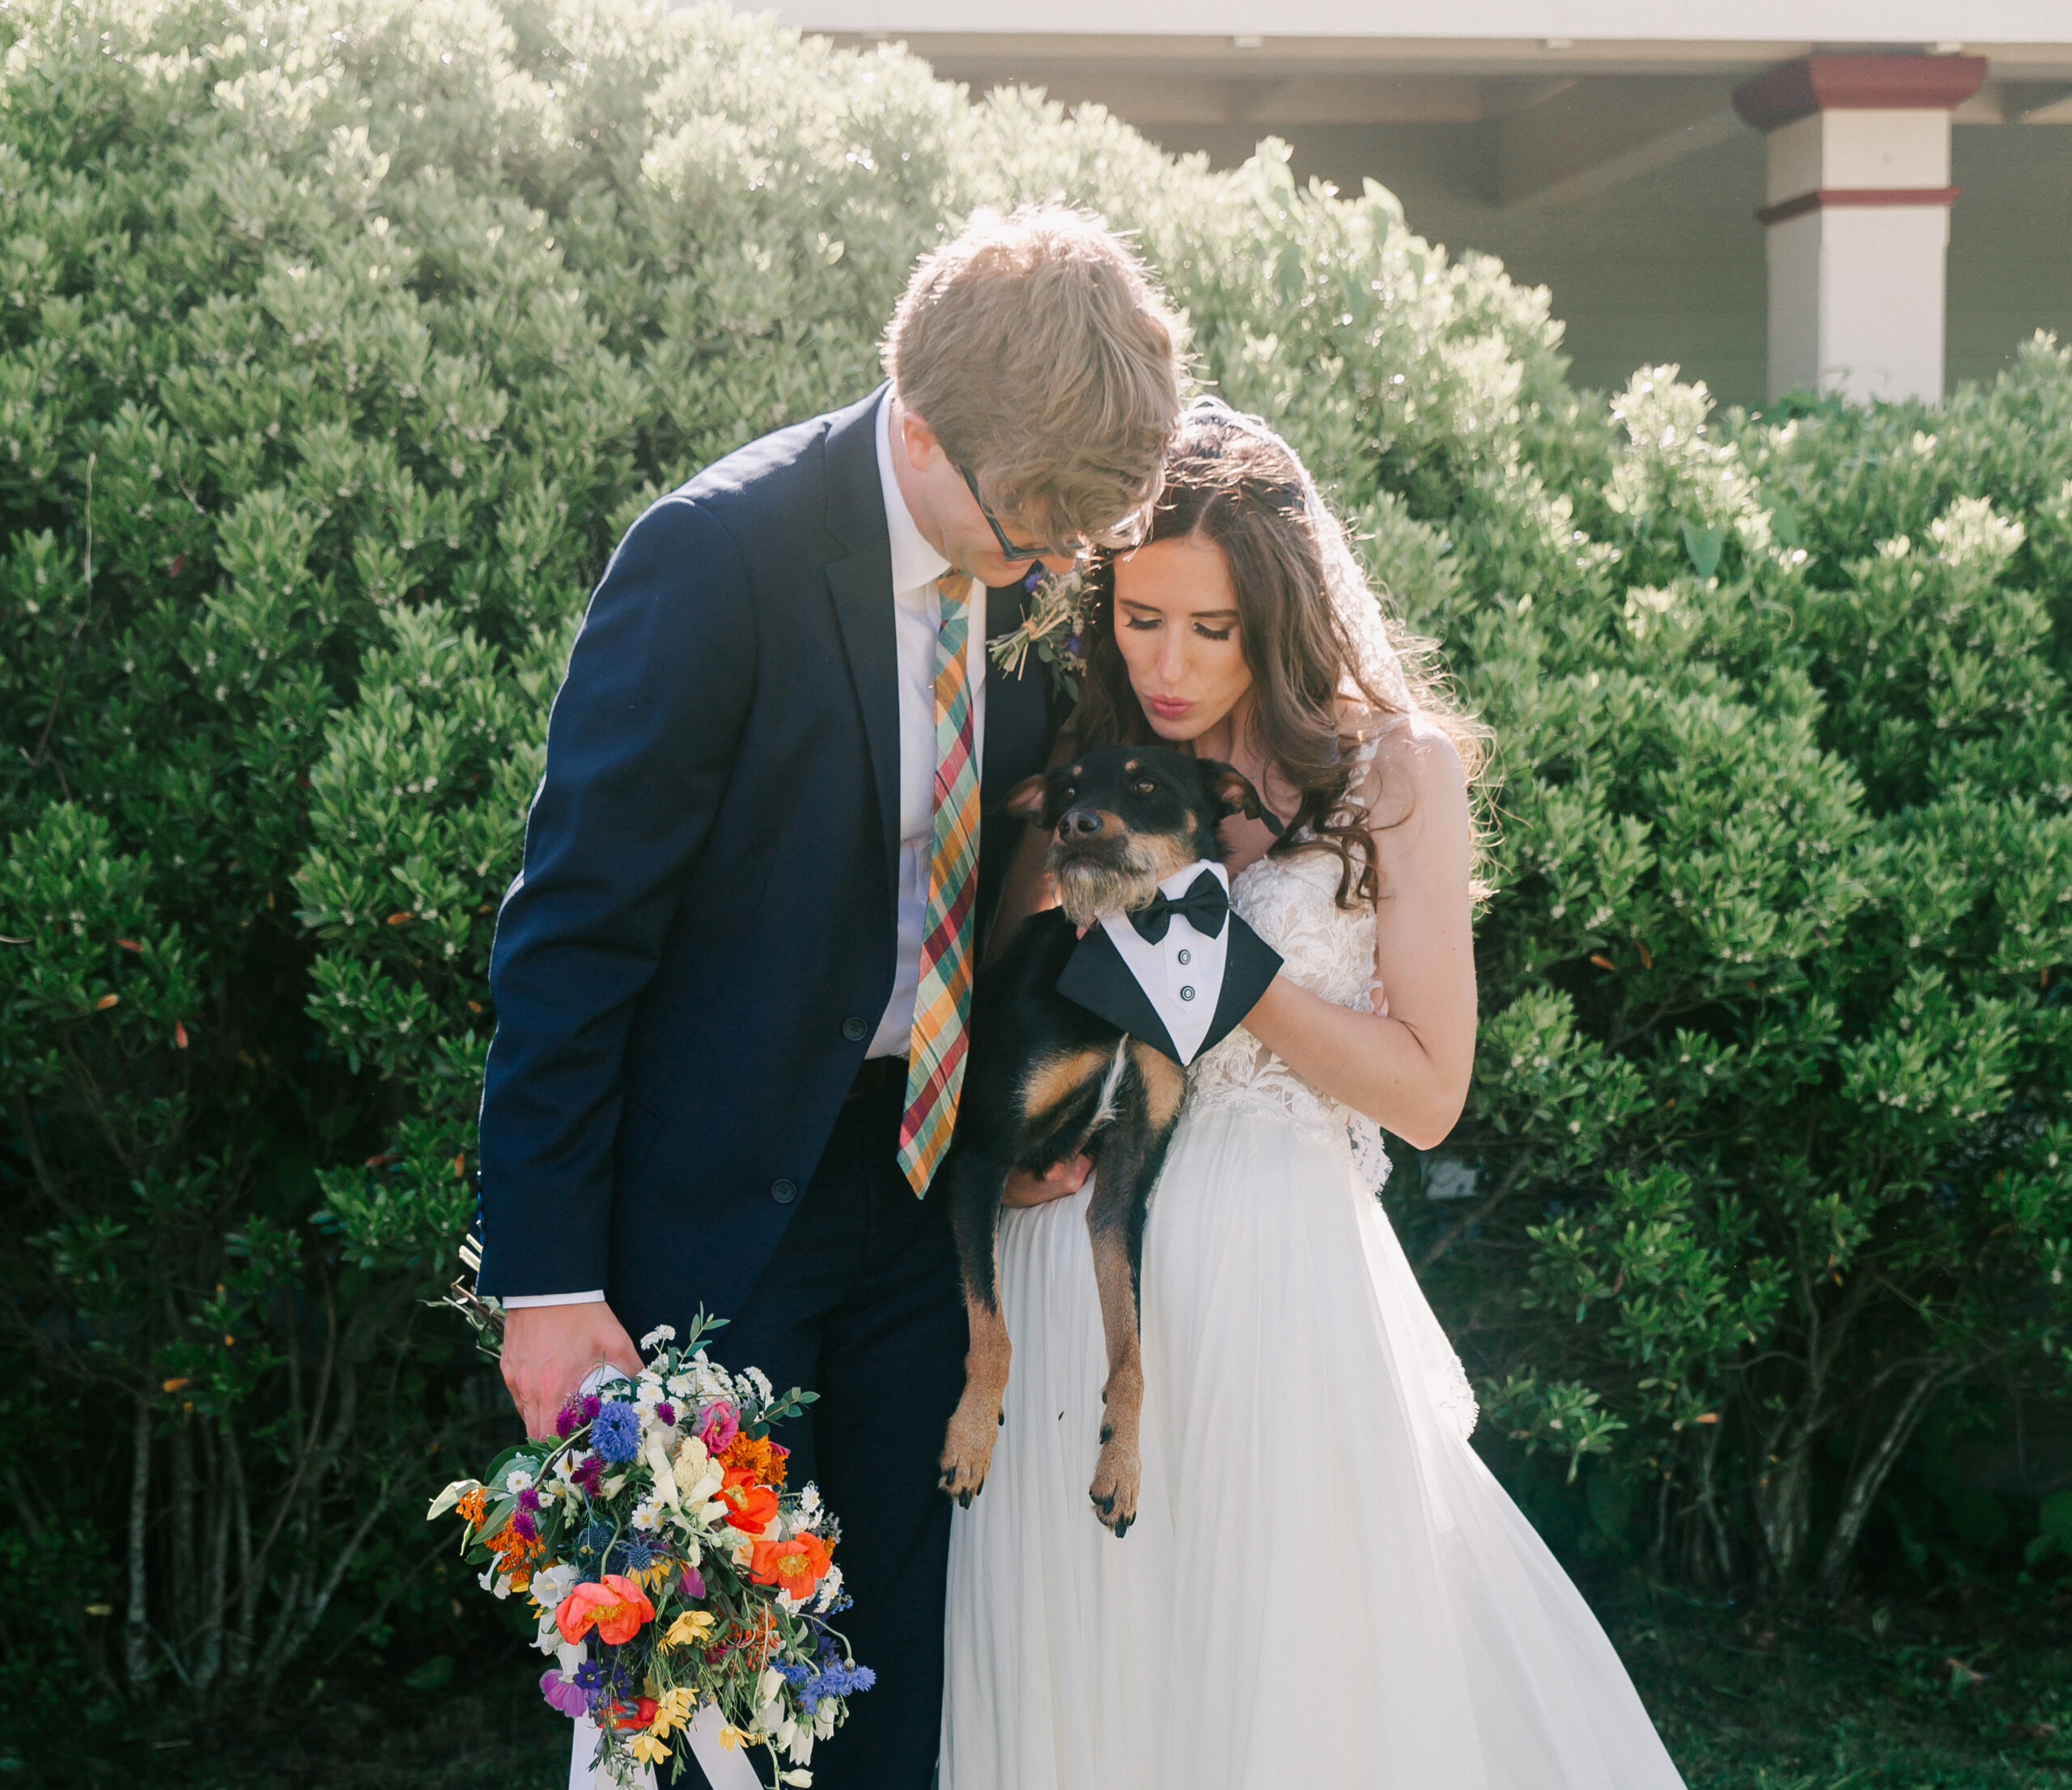 newlywed couple with their dog on their wedding day, planned by Cose Bella Events, an excellent Rhode Island wedding planner